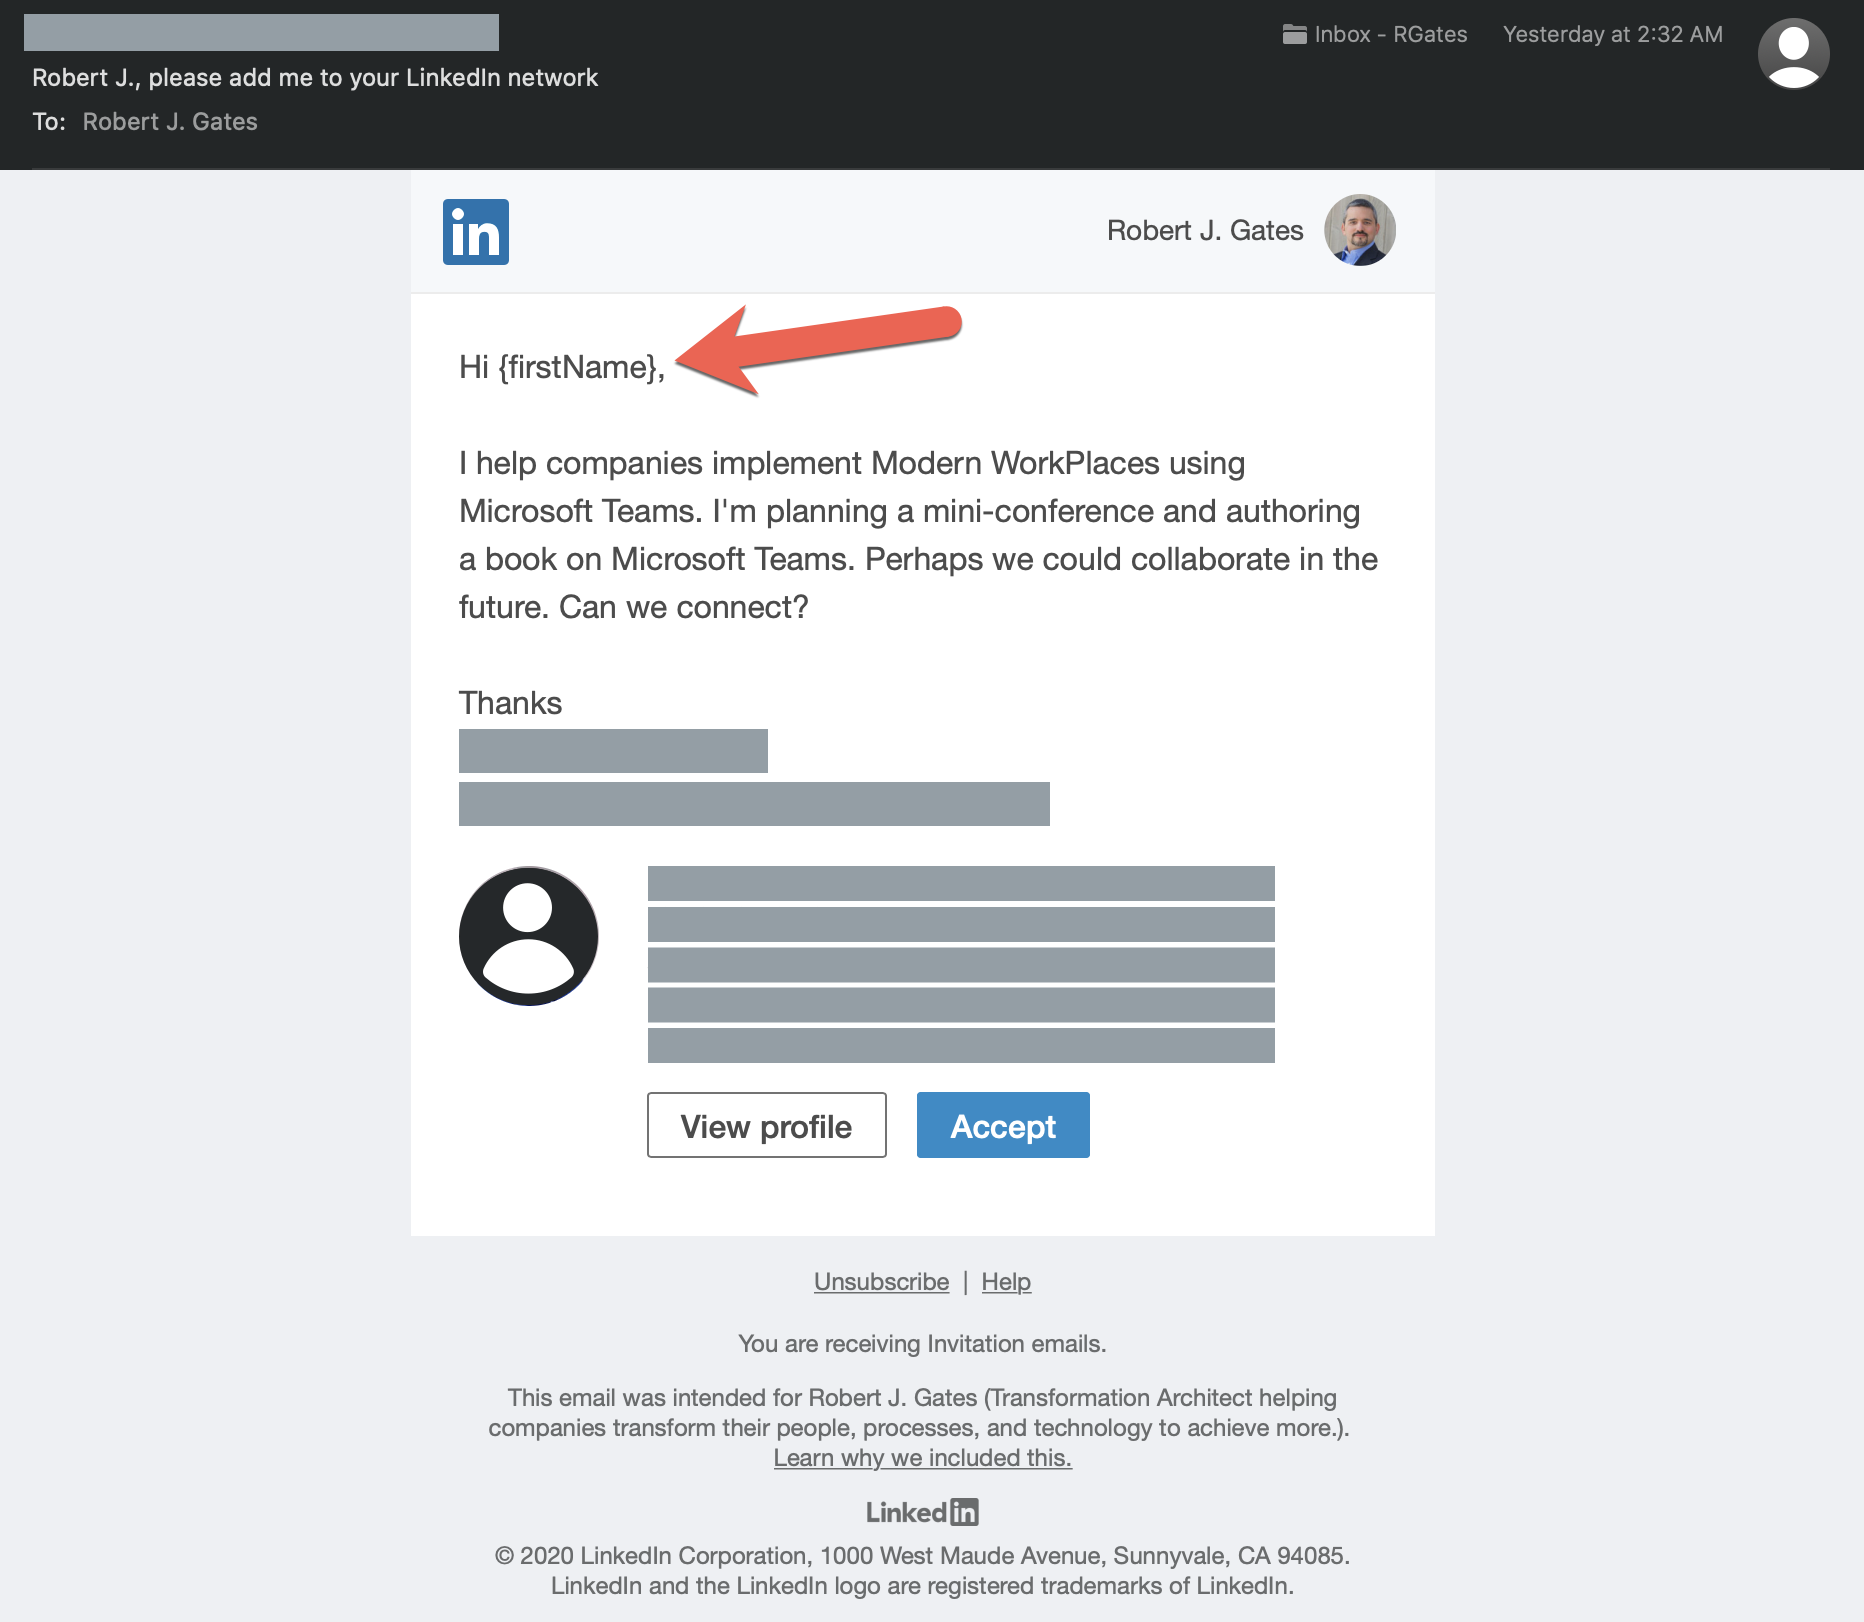 How not to send a LinkedIn message